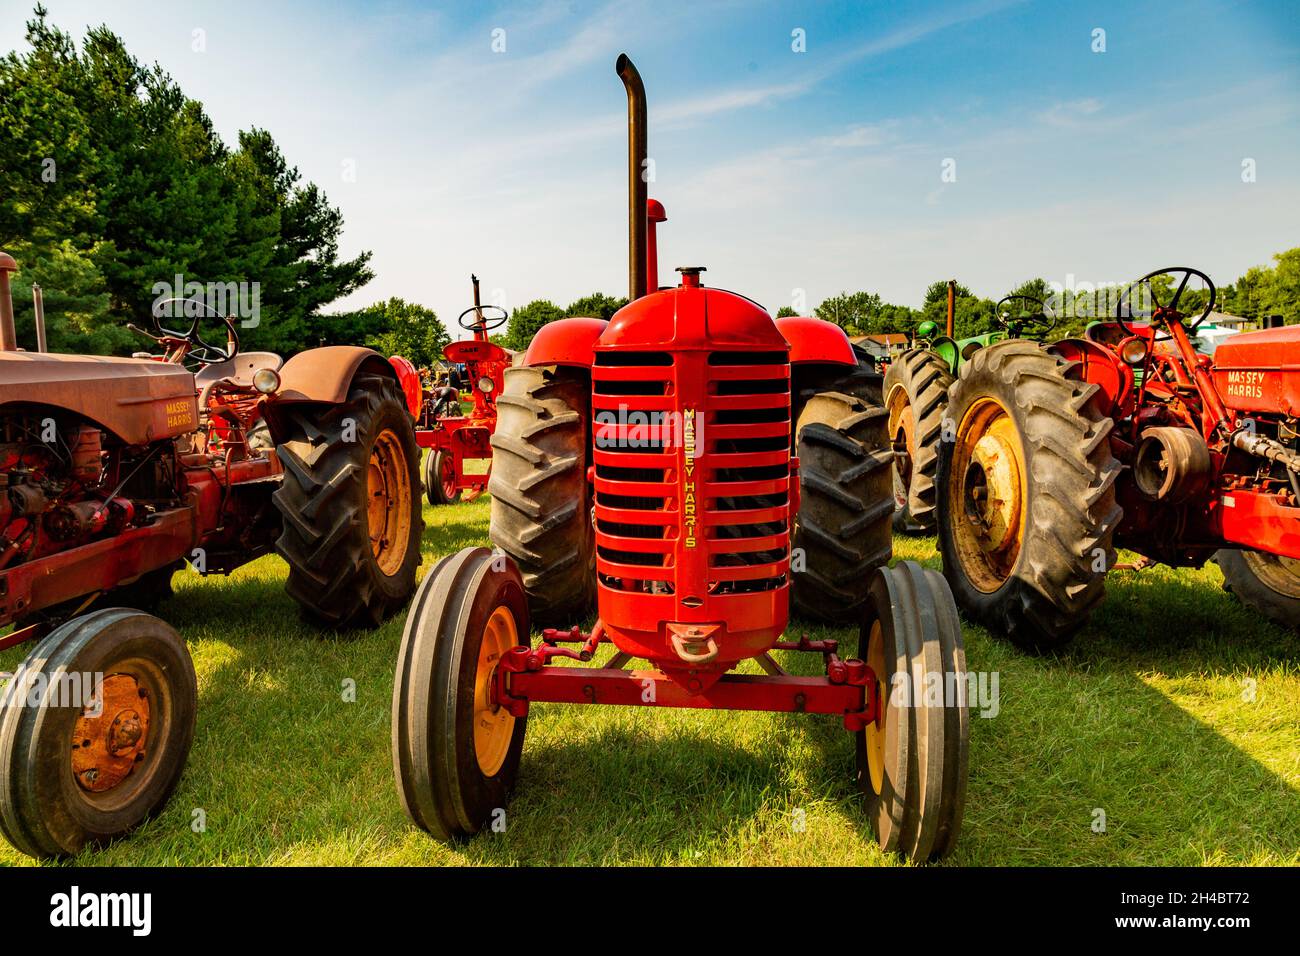 A red antique Massey Harris farm tractor on display at a tractor show in Warren, Indiana, USA. Stock Photo